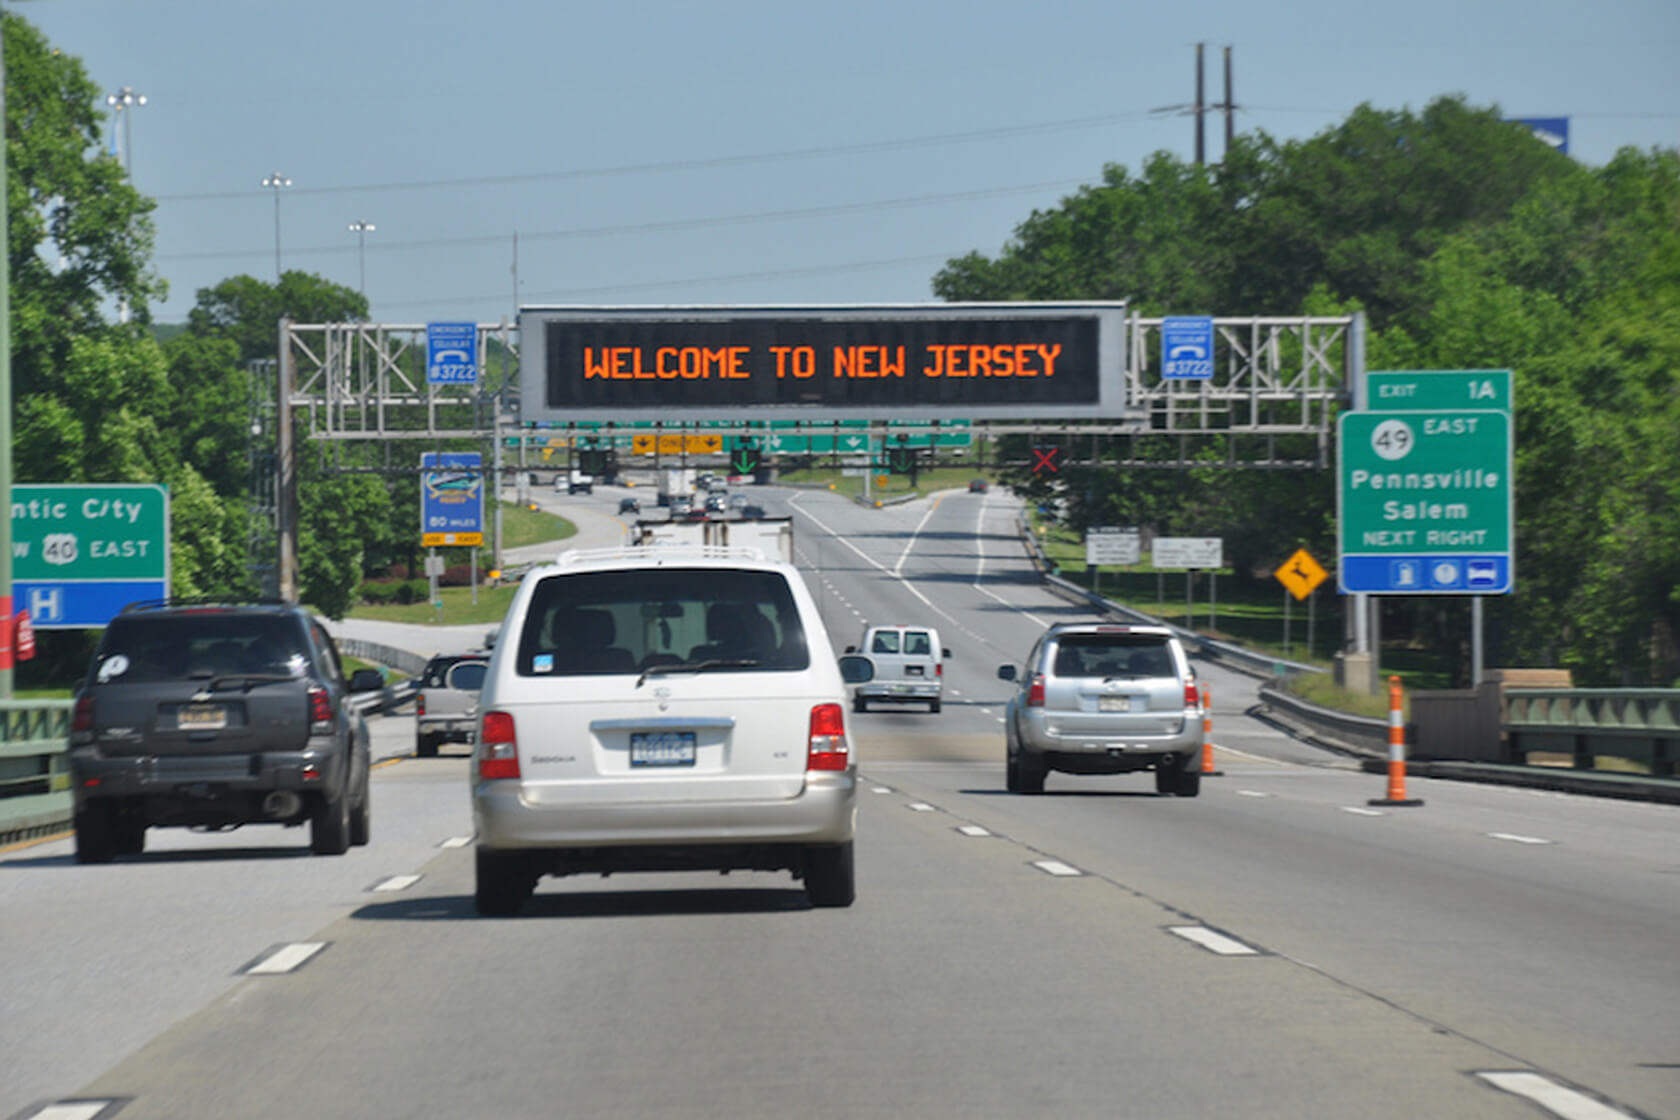 Image of highway with roadway sign reading "Welcome to New Jersey"